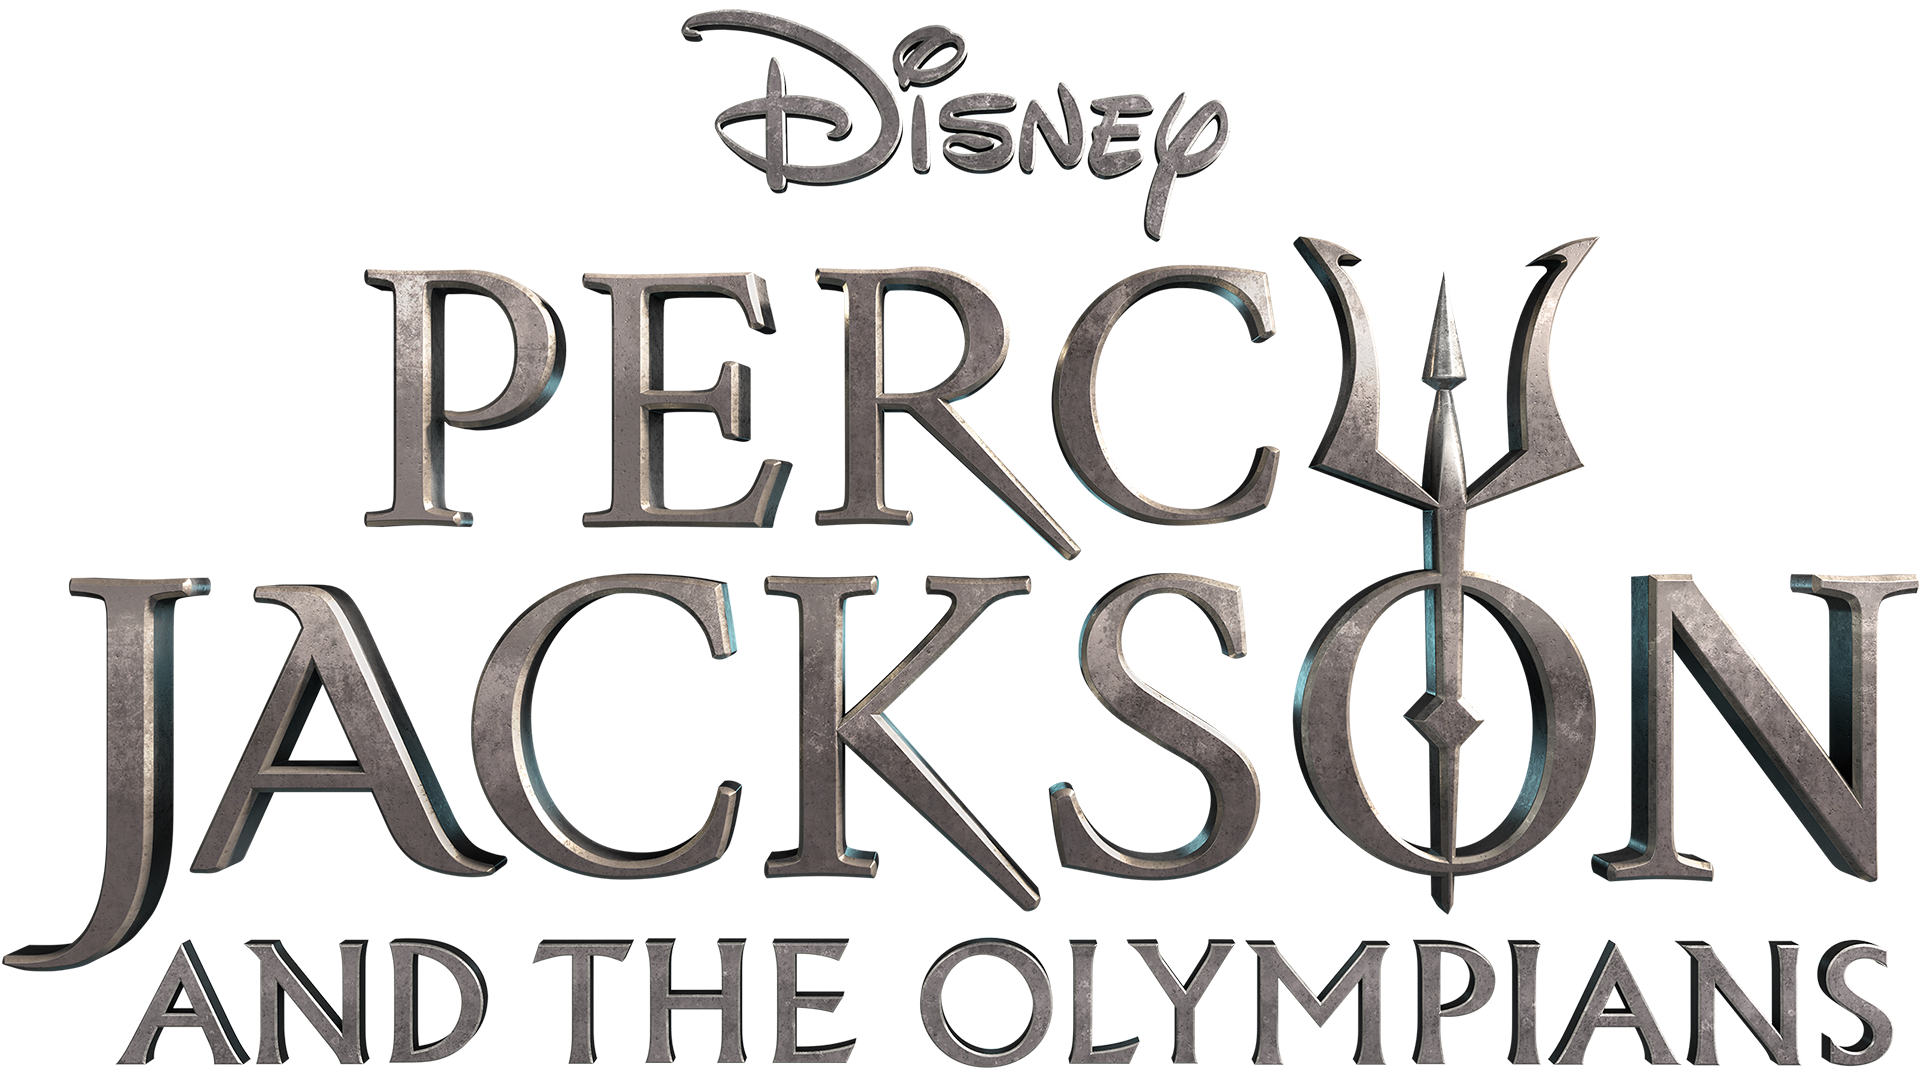 Percy Jackson' Disney+ Series Expands Cast With Lance Reddick and